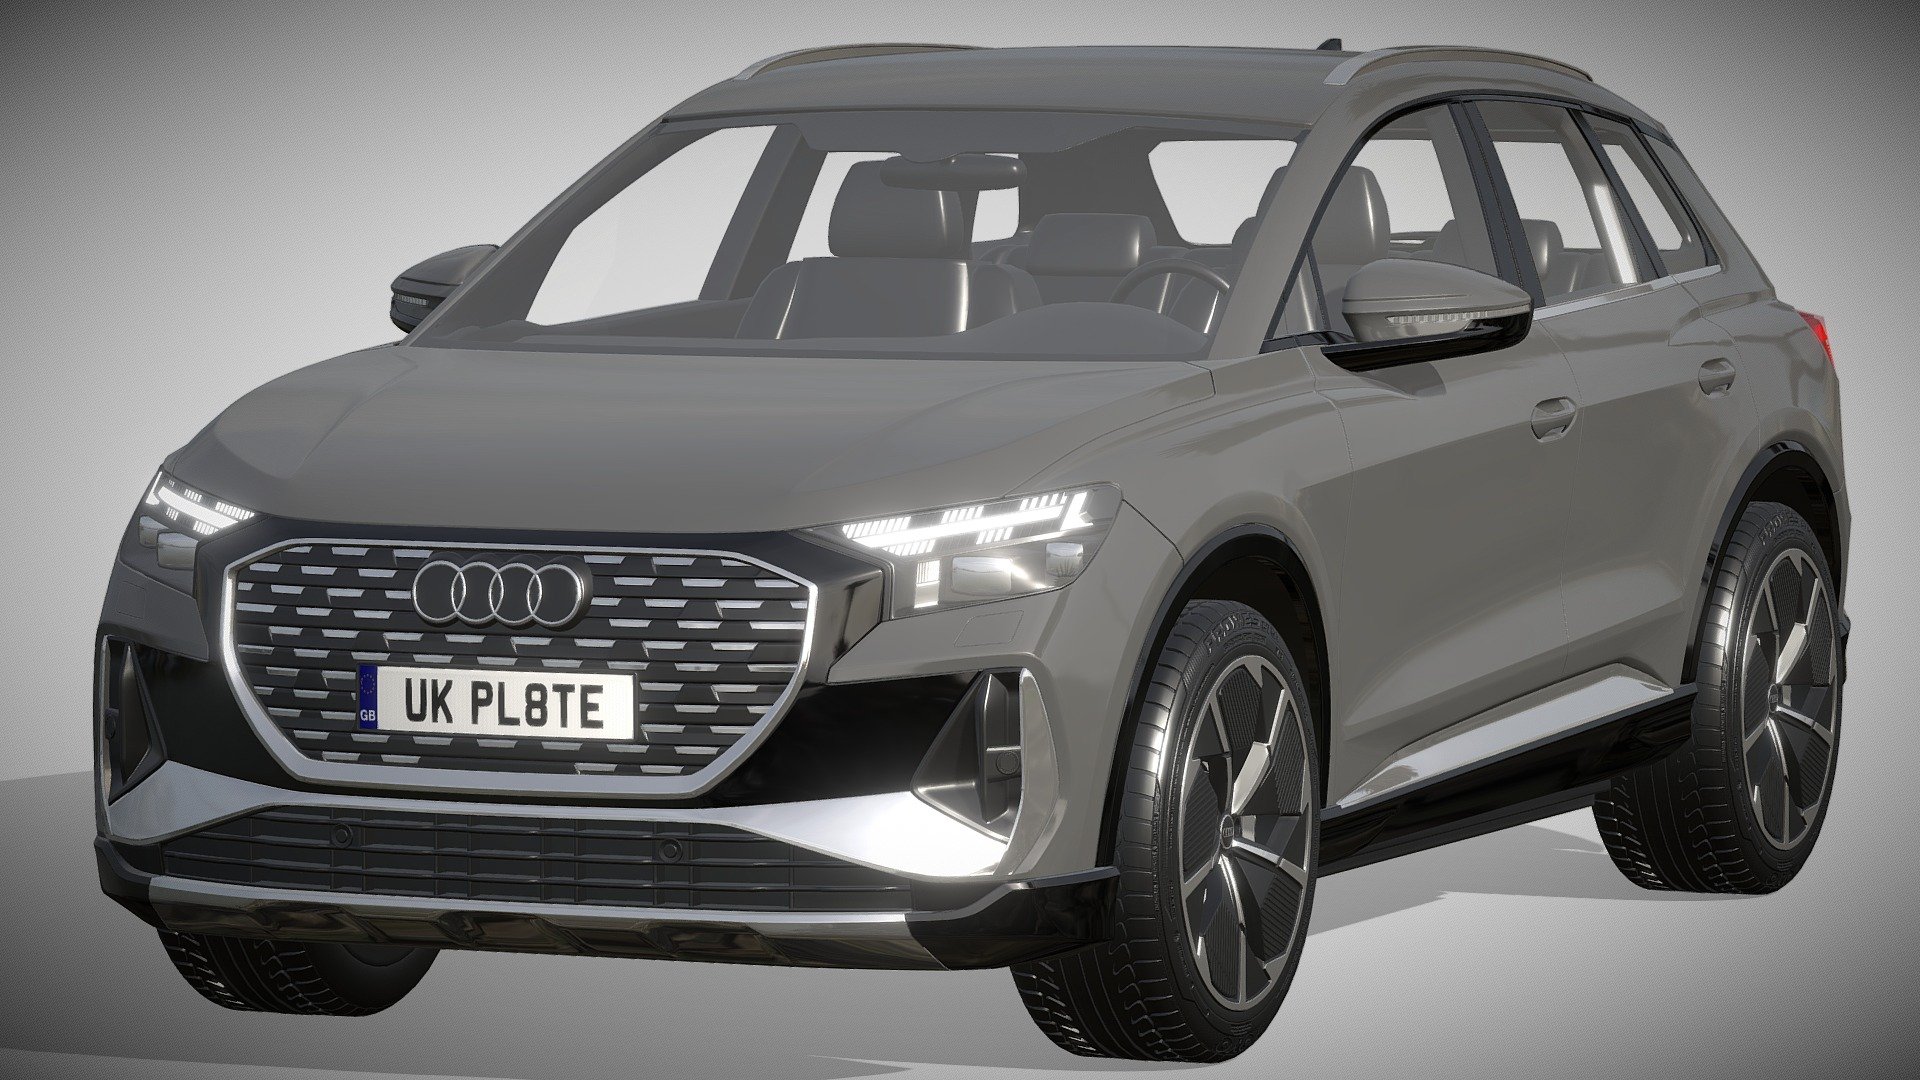 Audi Q4 e-tron

https://www.audi.de/de/brand/de/neuwagen/q4-e-tron/q4-e-tron.html#

Clean geometry Light weight model, yet completely detailed for HI-Res renders. Use for movies, Advertisements or games

Corona render and materials

All textures include in *.rar files

Lighting setup is not included in the file! - Audi Q4 e-tron - Buy Royalty Free 3D model by zifir3d 3d model